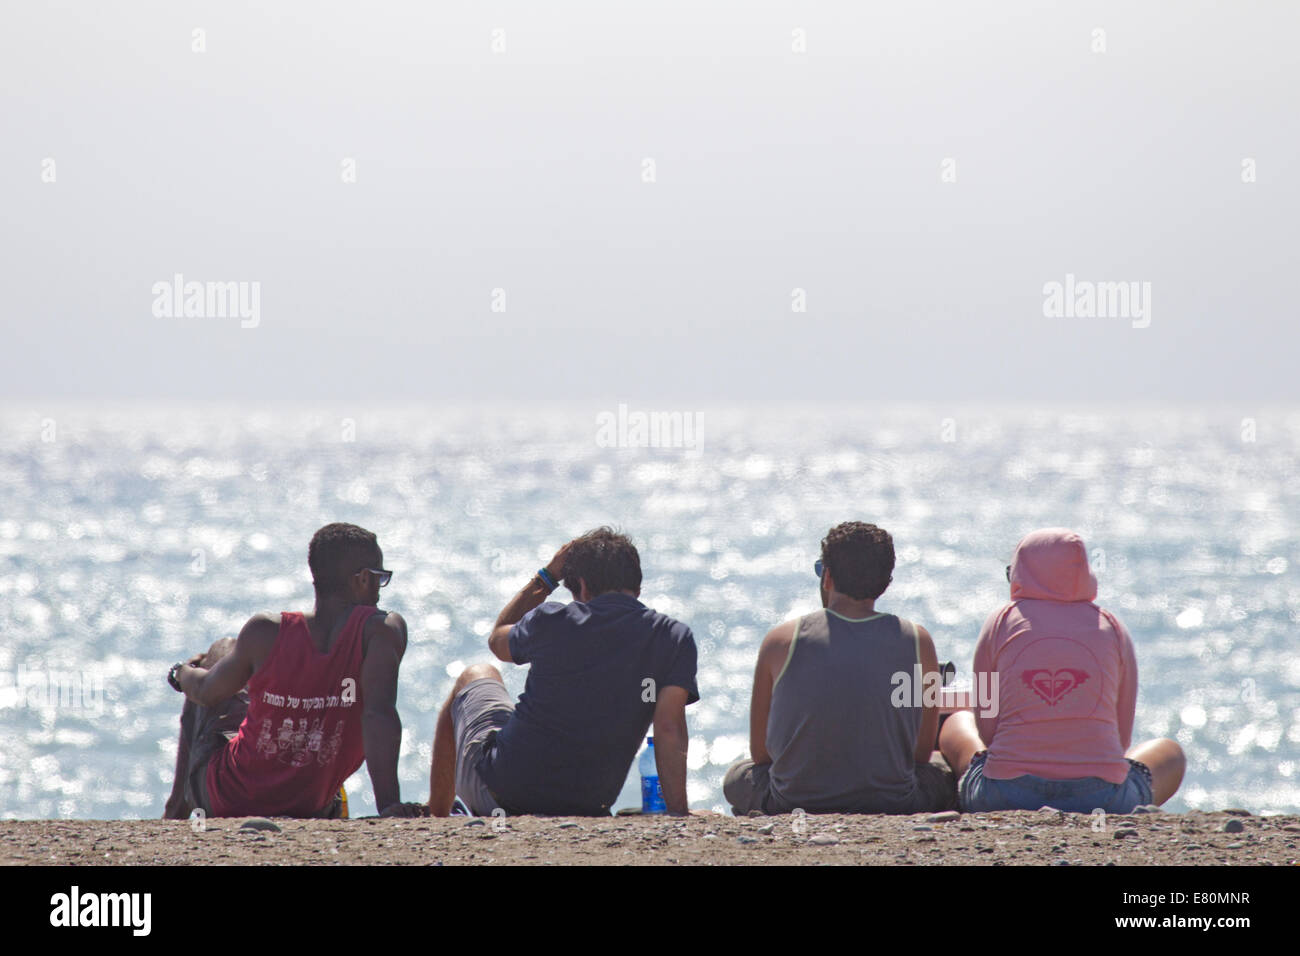 Four People Sitting on the Beach with Backs to the Camera Stock Photo